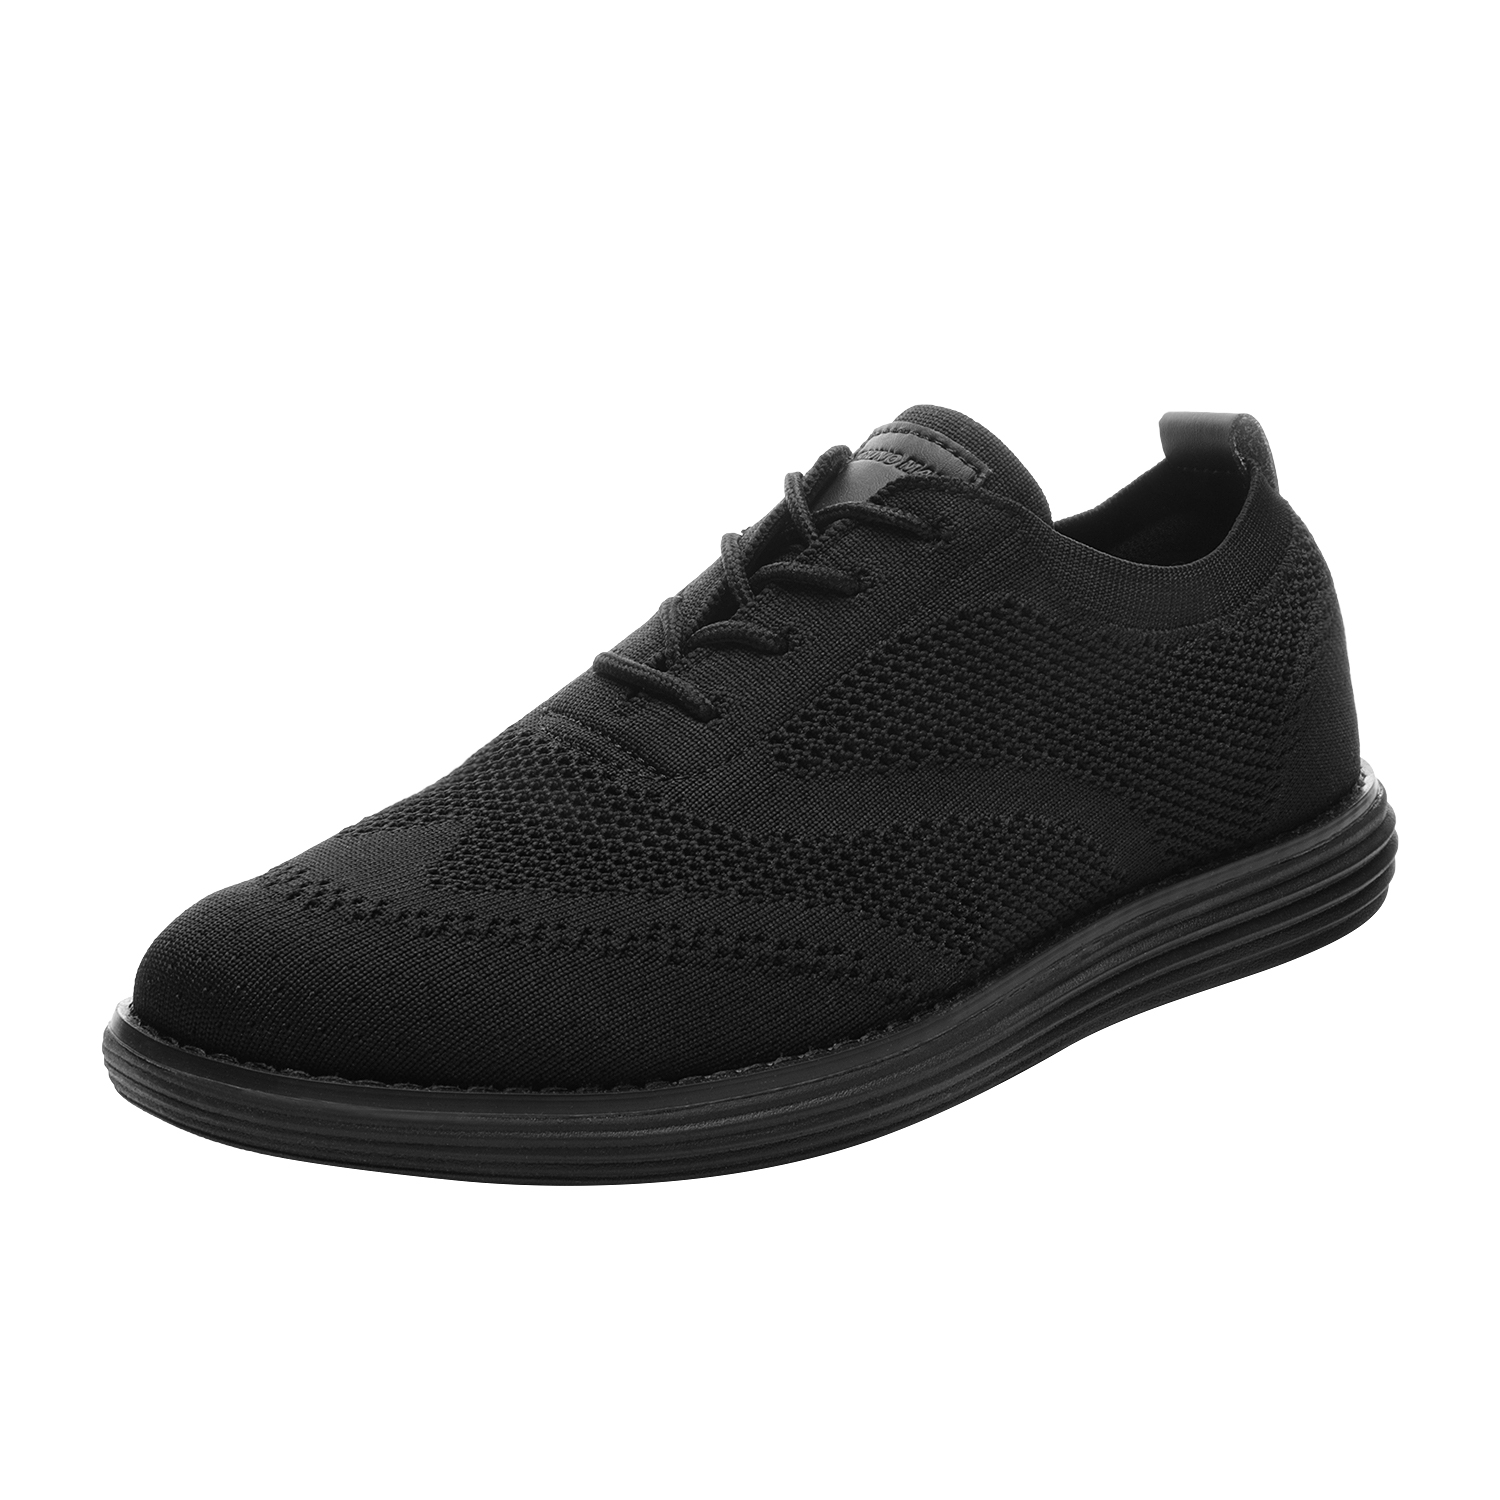 Bruno Marc Men's Lightweight Sneakers Casual Athletic Walking Shoes Tennis Shoes GRAND-02 ALL/BLACK Size 9 - image 1 of 5